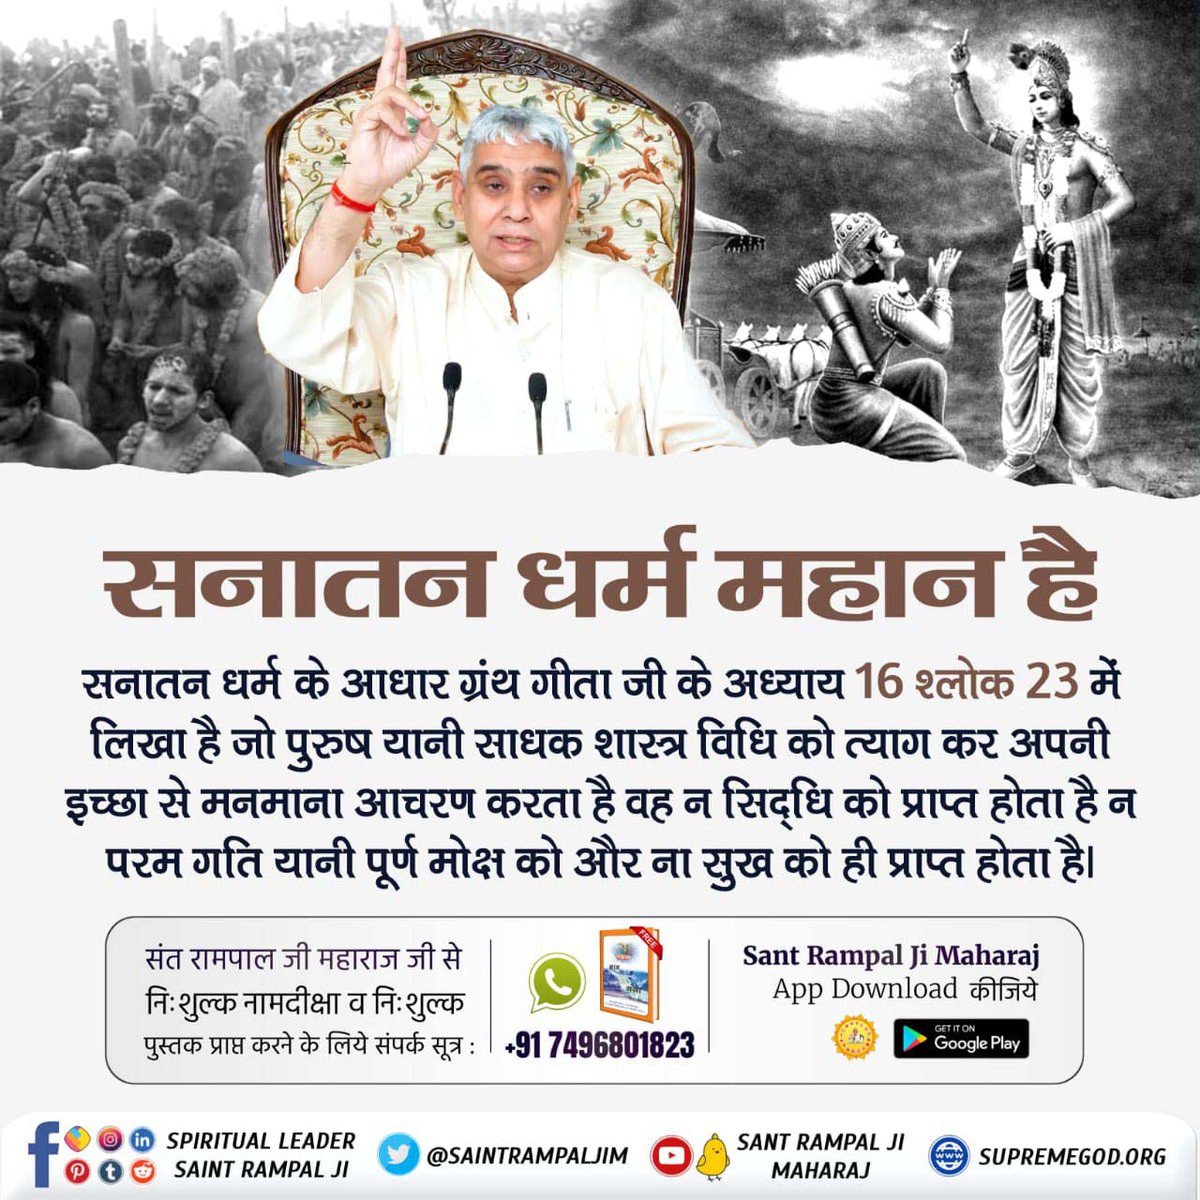 #आओ_जानें_सनातन_को A Satguru is identified by his knowledge. If that knowledge is attested by the scriptures, only then he is a Satguru✍️